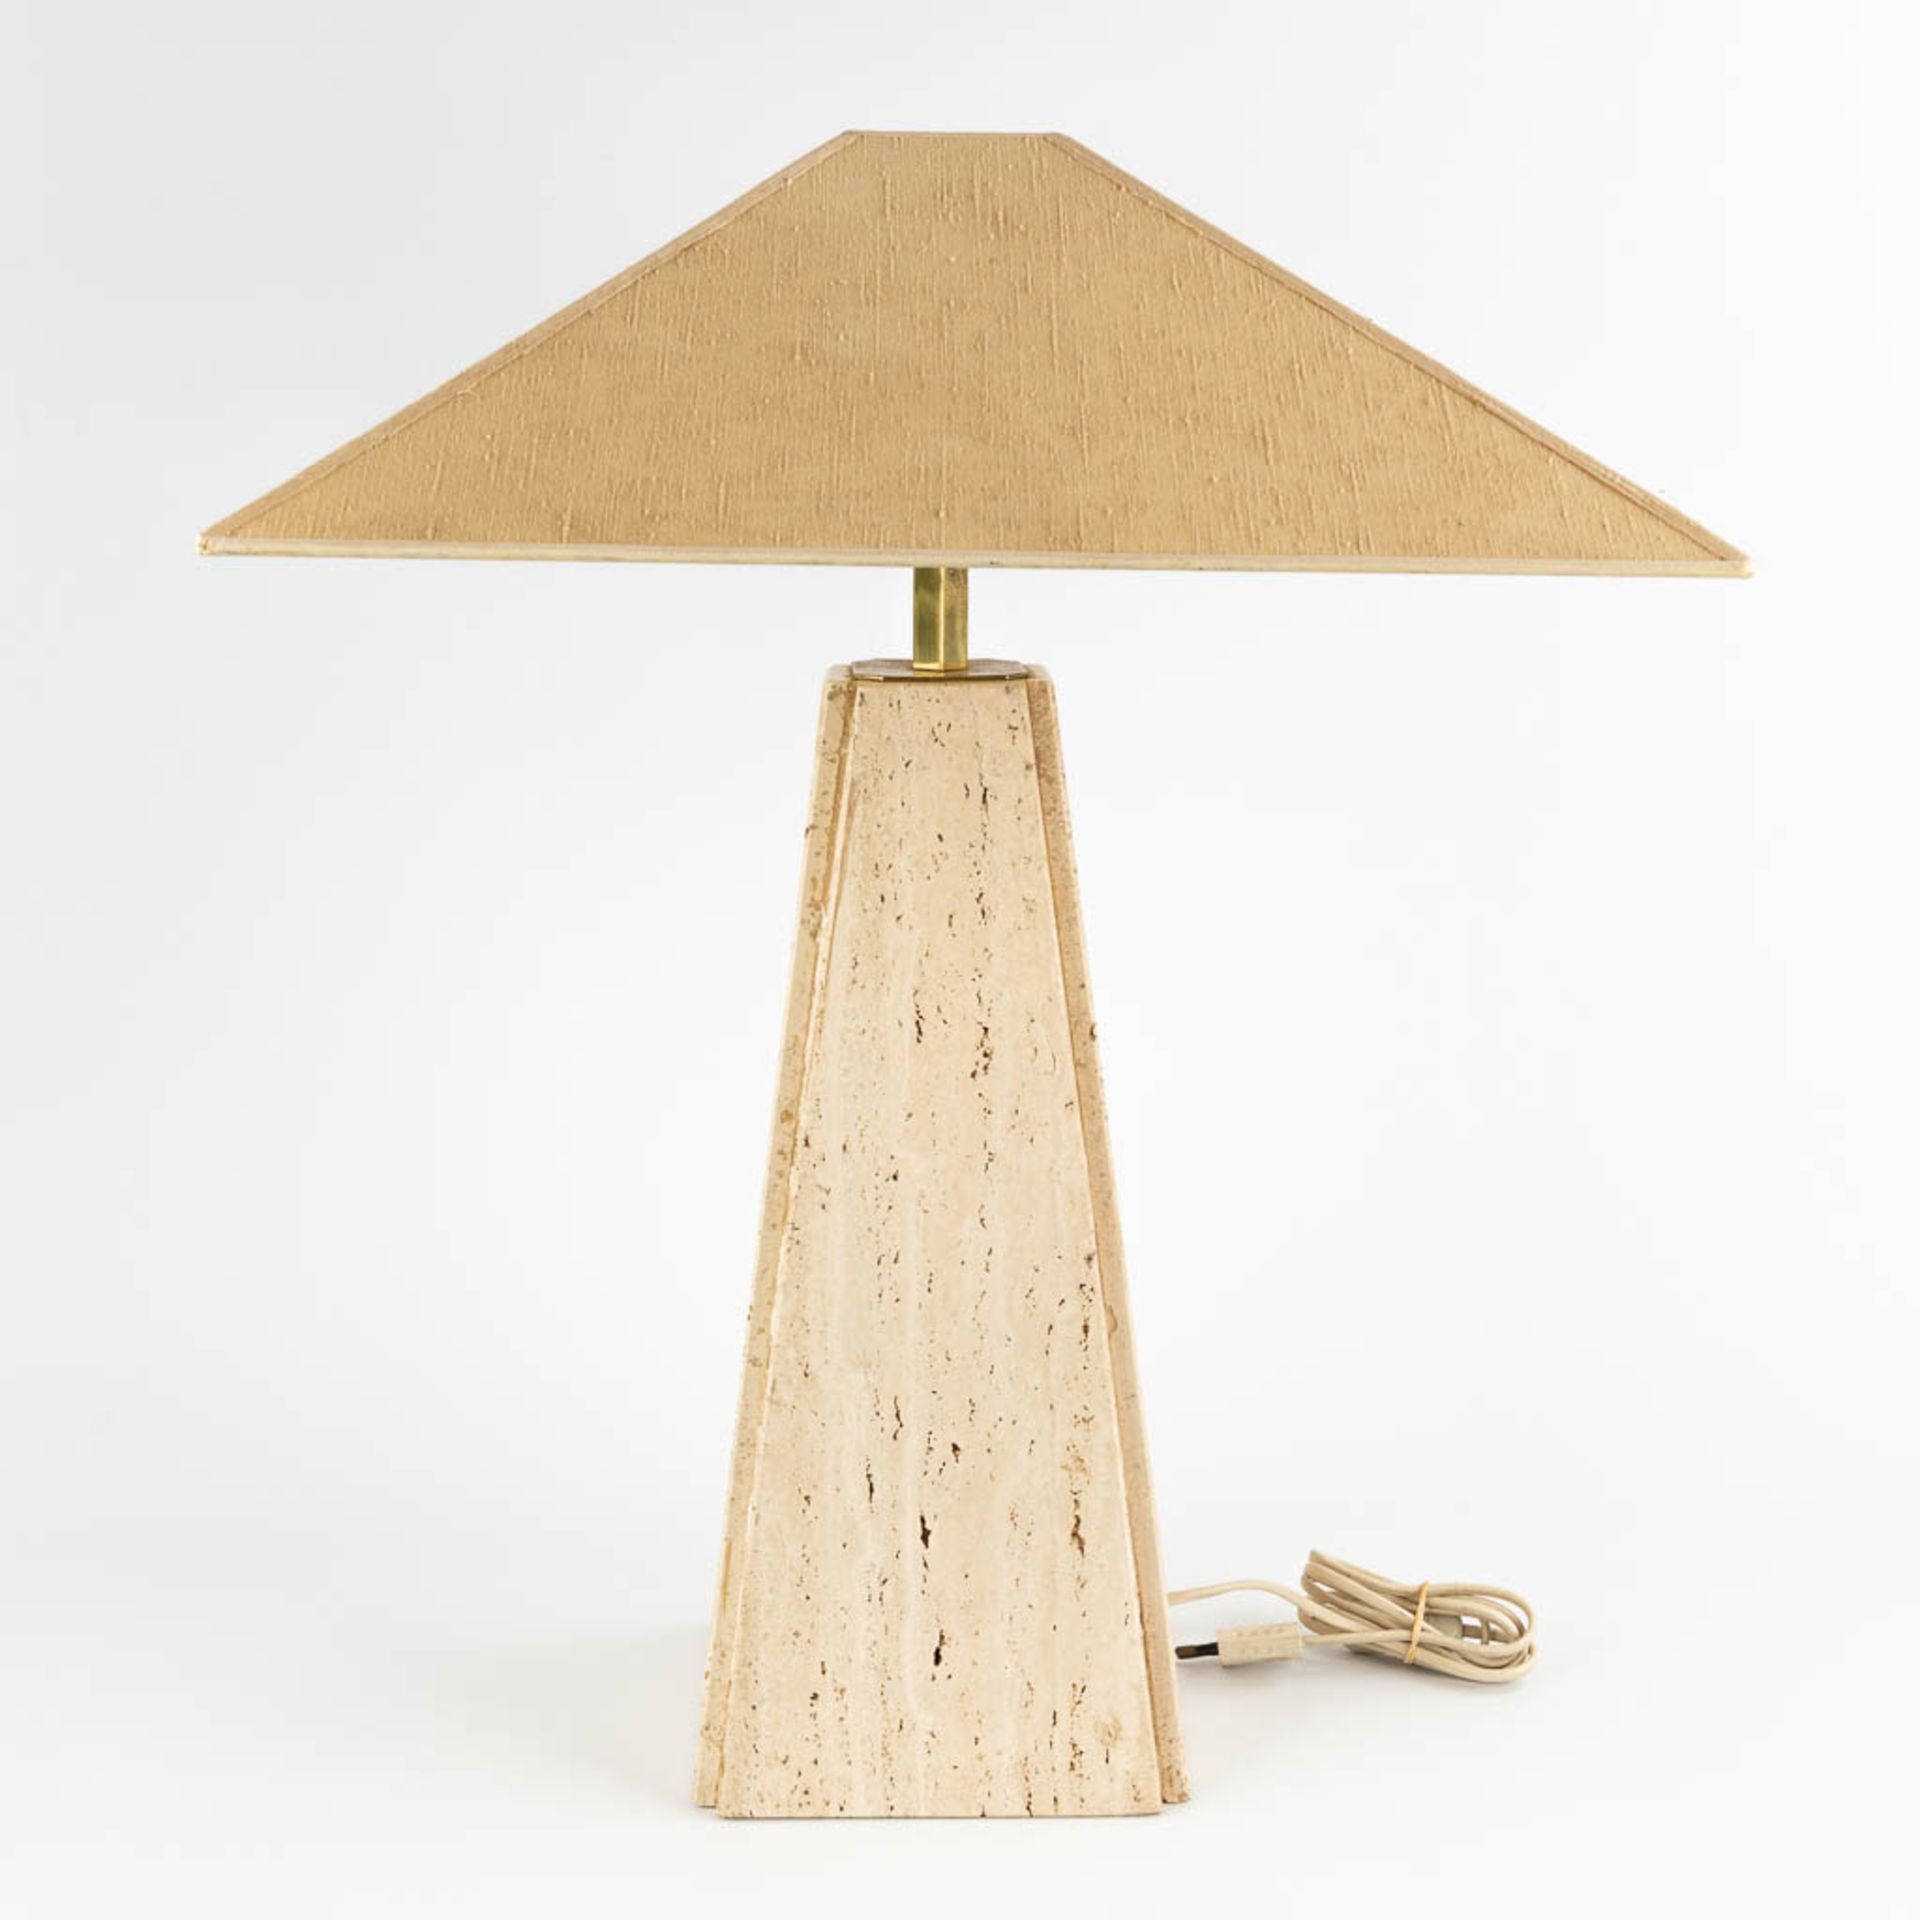 Camille BREESCHE (XX)(attr.) Table lamp, travertine and brass. 20th C. (D:50 x W:50 x H:66 cm) - Image 4 of 11